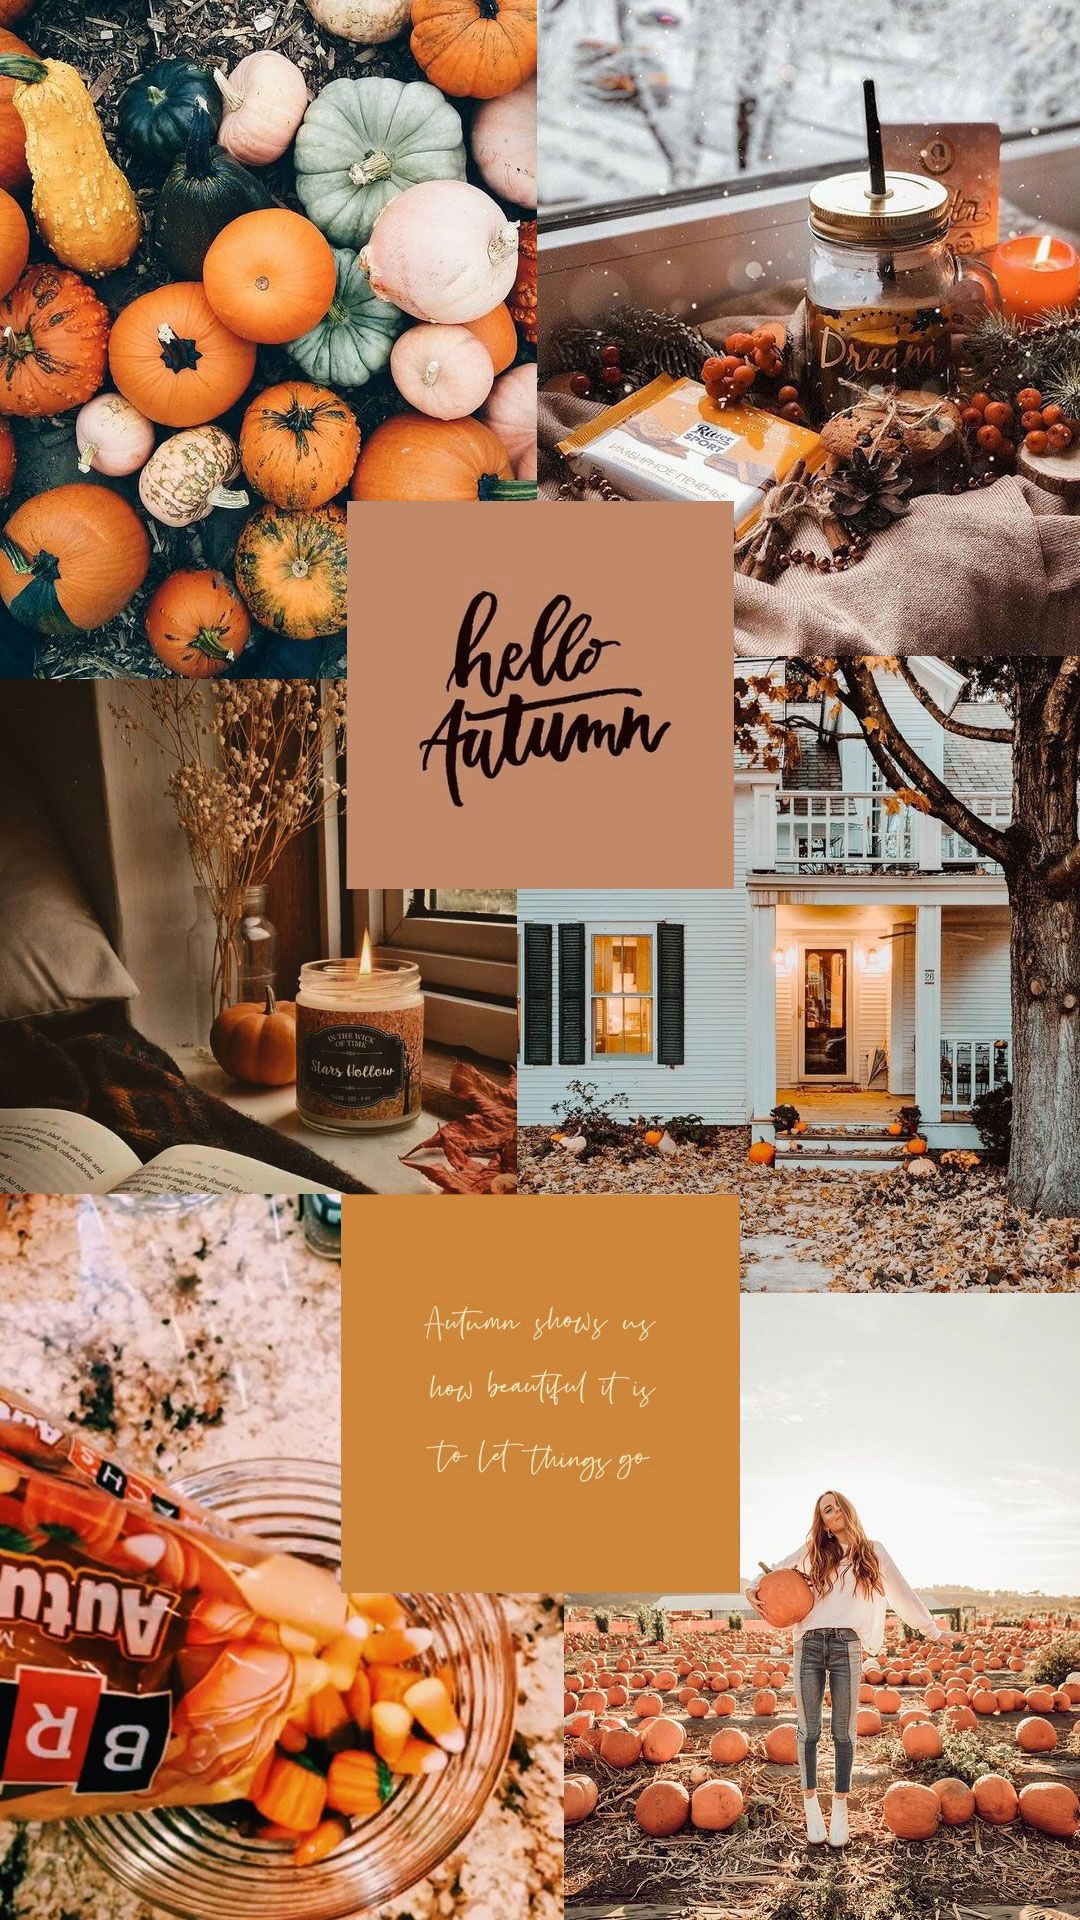 Autumn Collage Wallpaper : Pretty Fall Collage for Phone Wallpaper